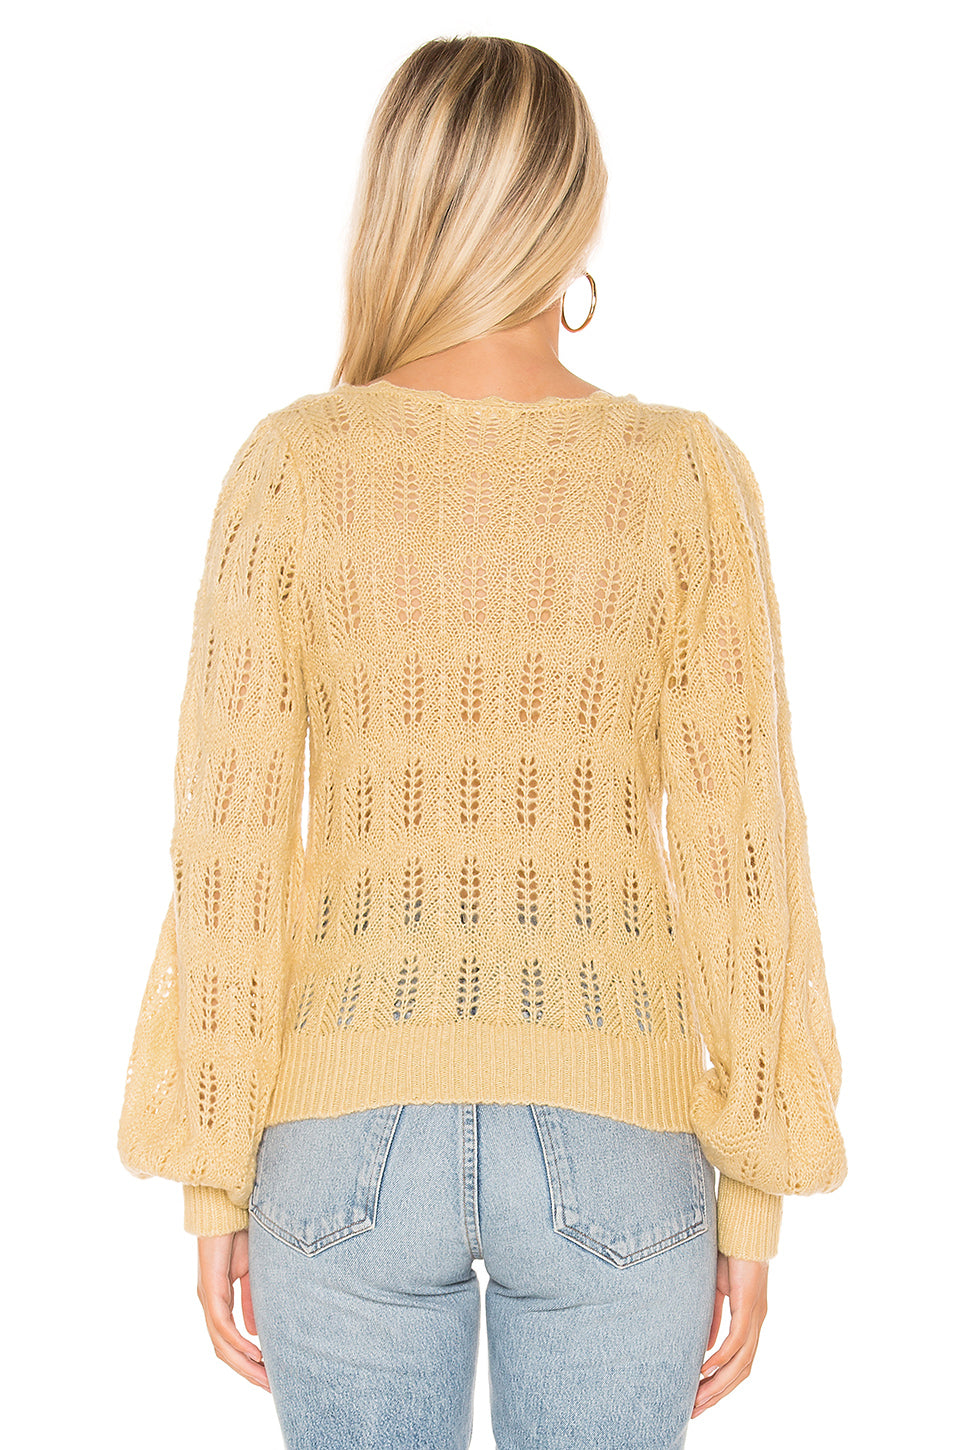 Amelie Sweater in YELLOW